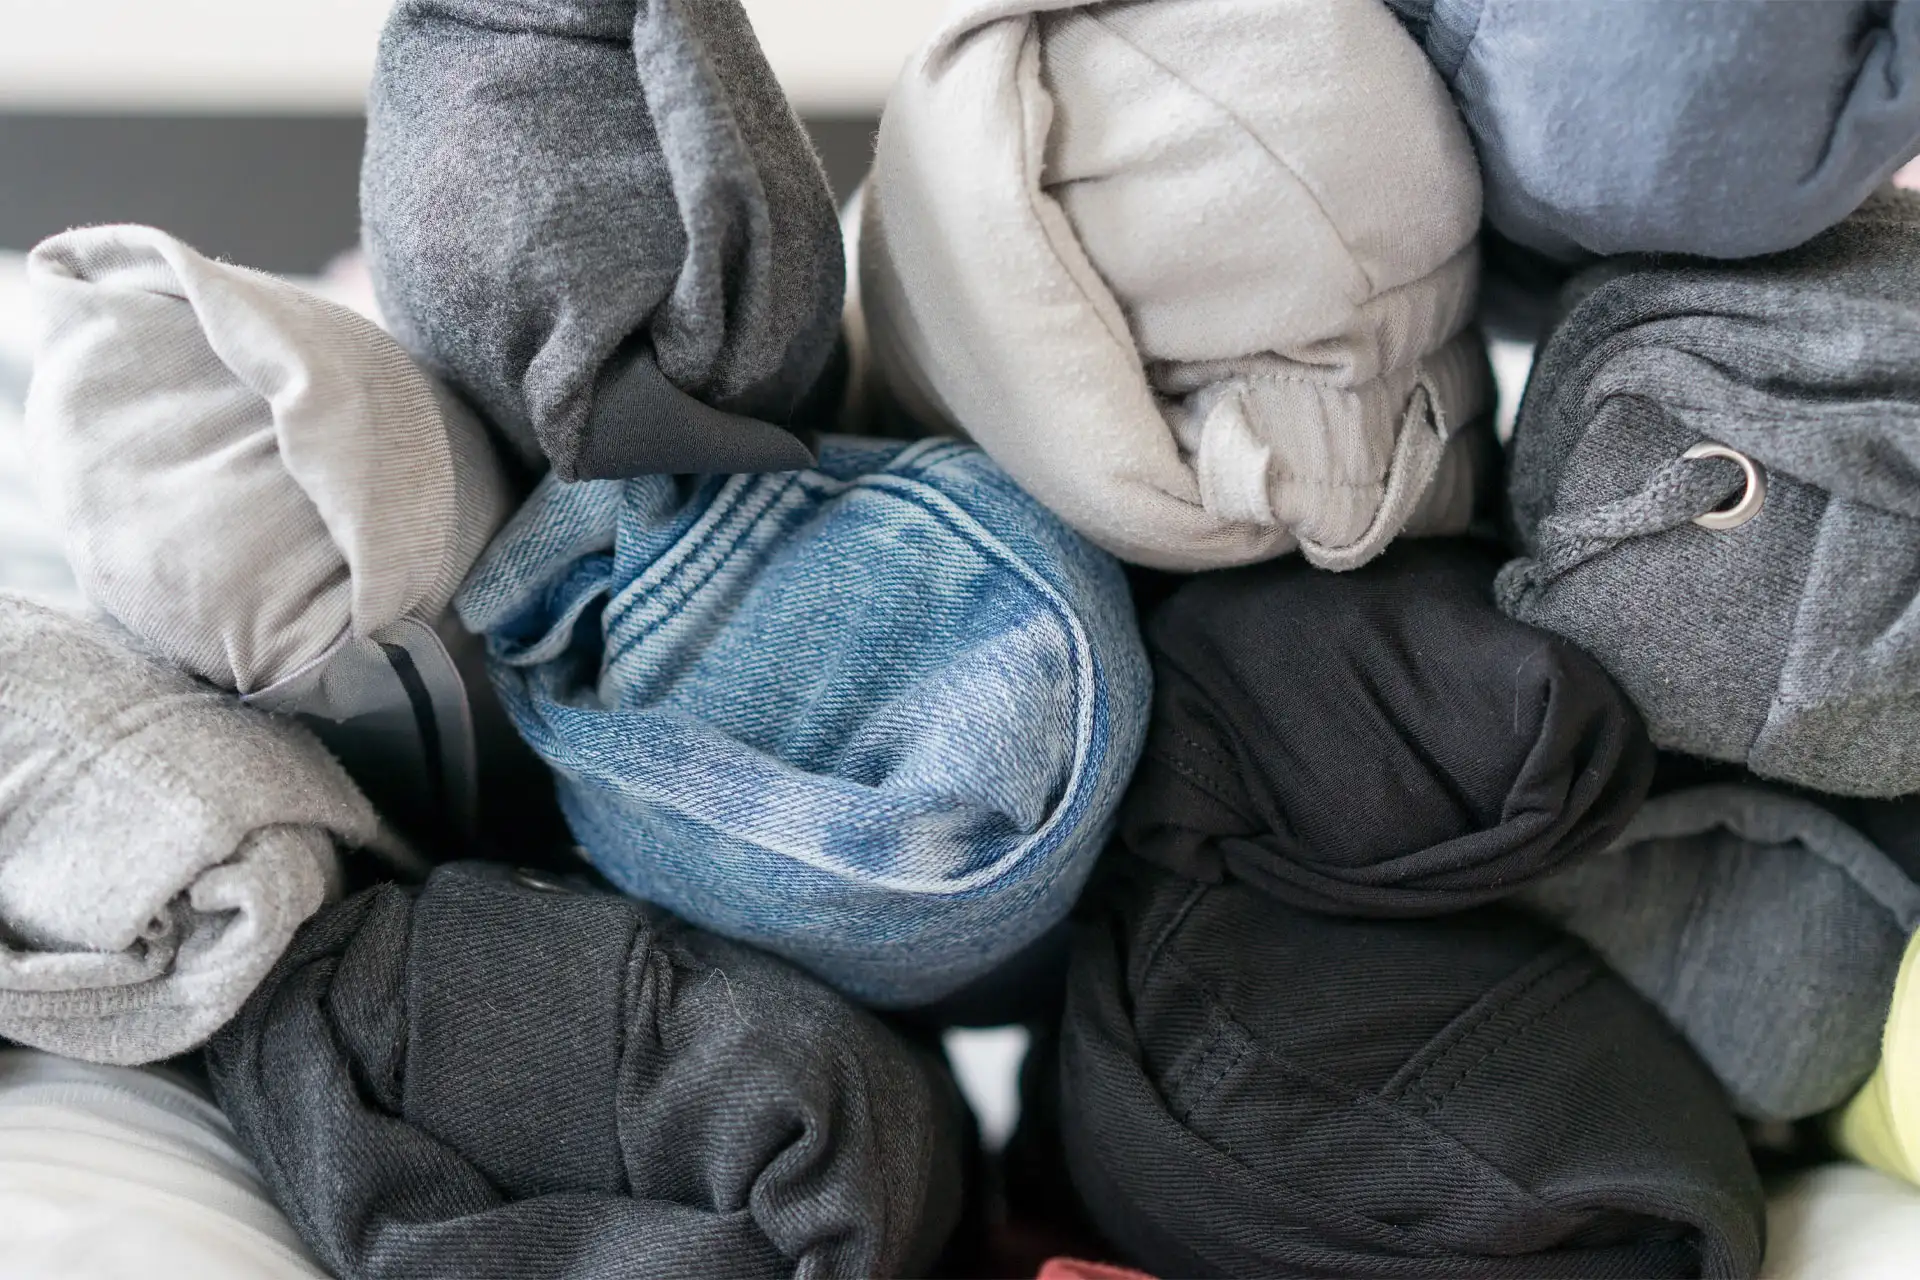 Rolled Clothes; Courtesy of BBPPHOTO/Shutterstock.com